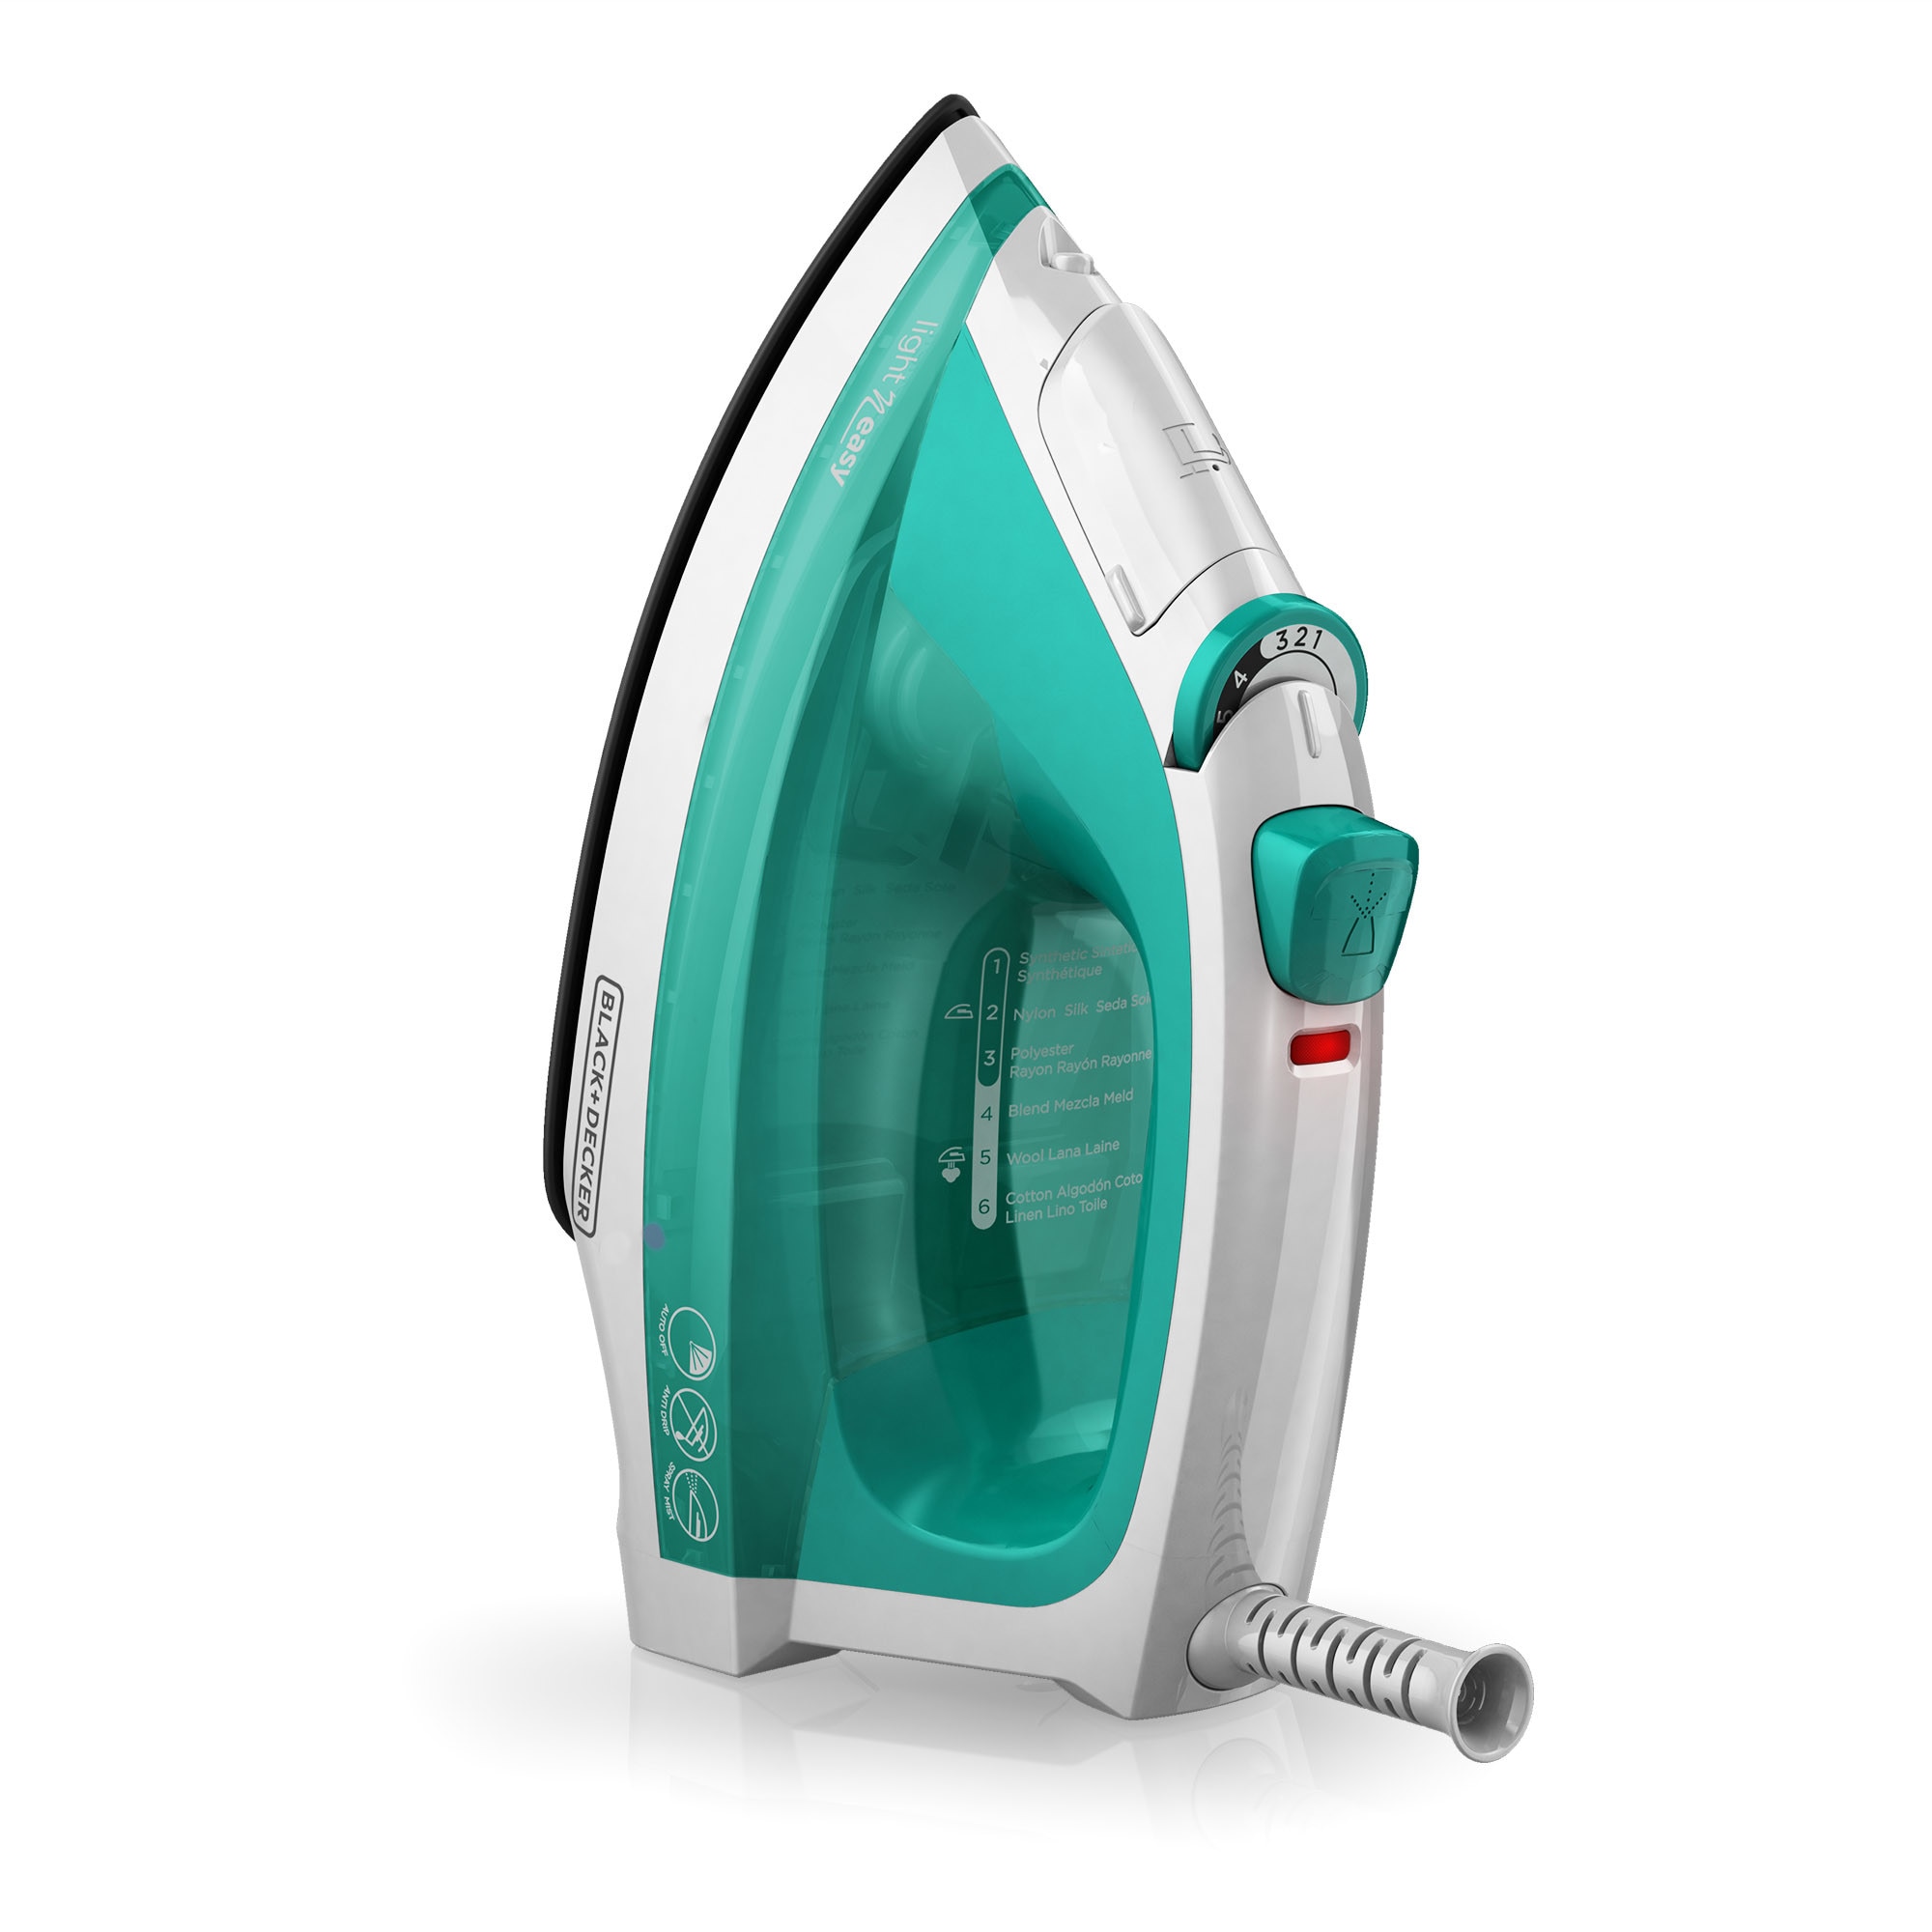 BLACK+DECKER Light 'N Easy Turquoise Auto-steam Iron Automatic